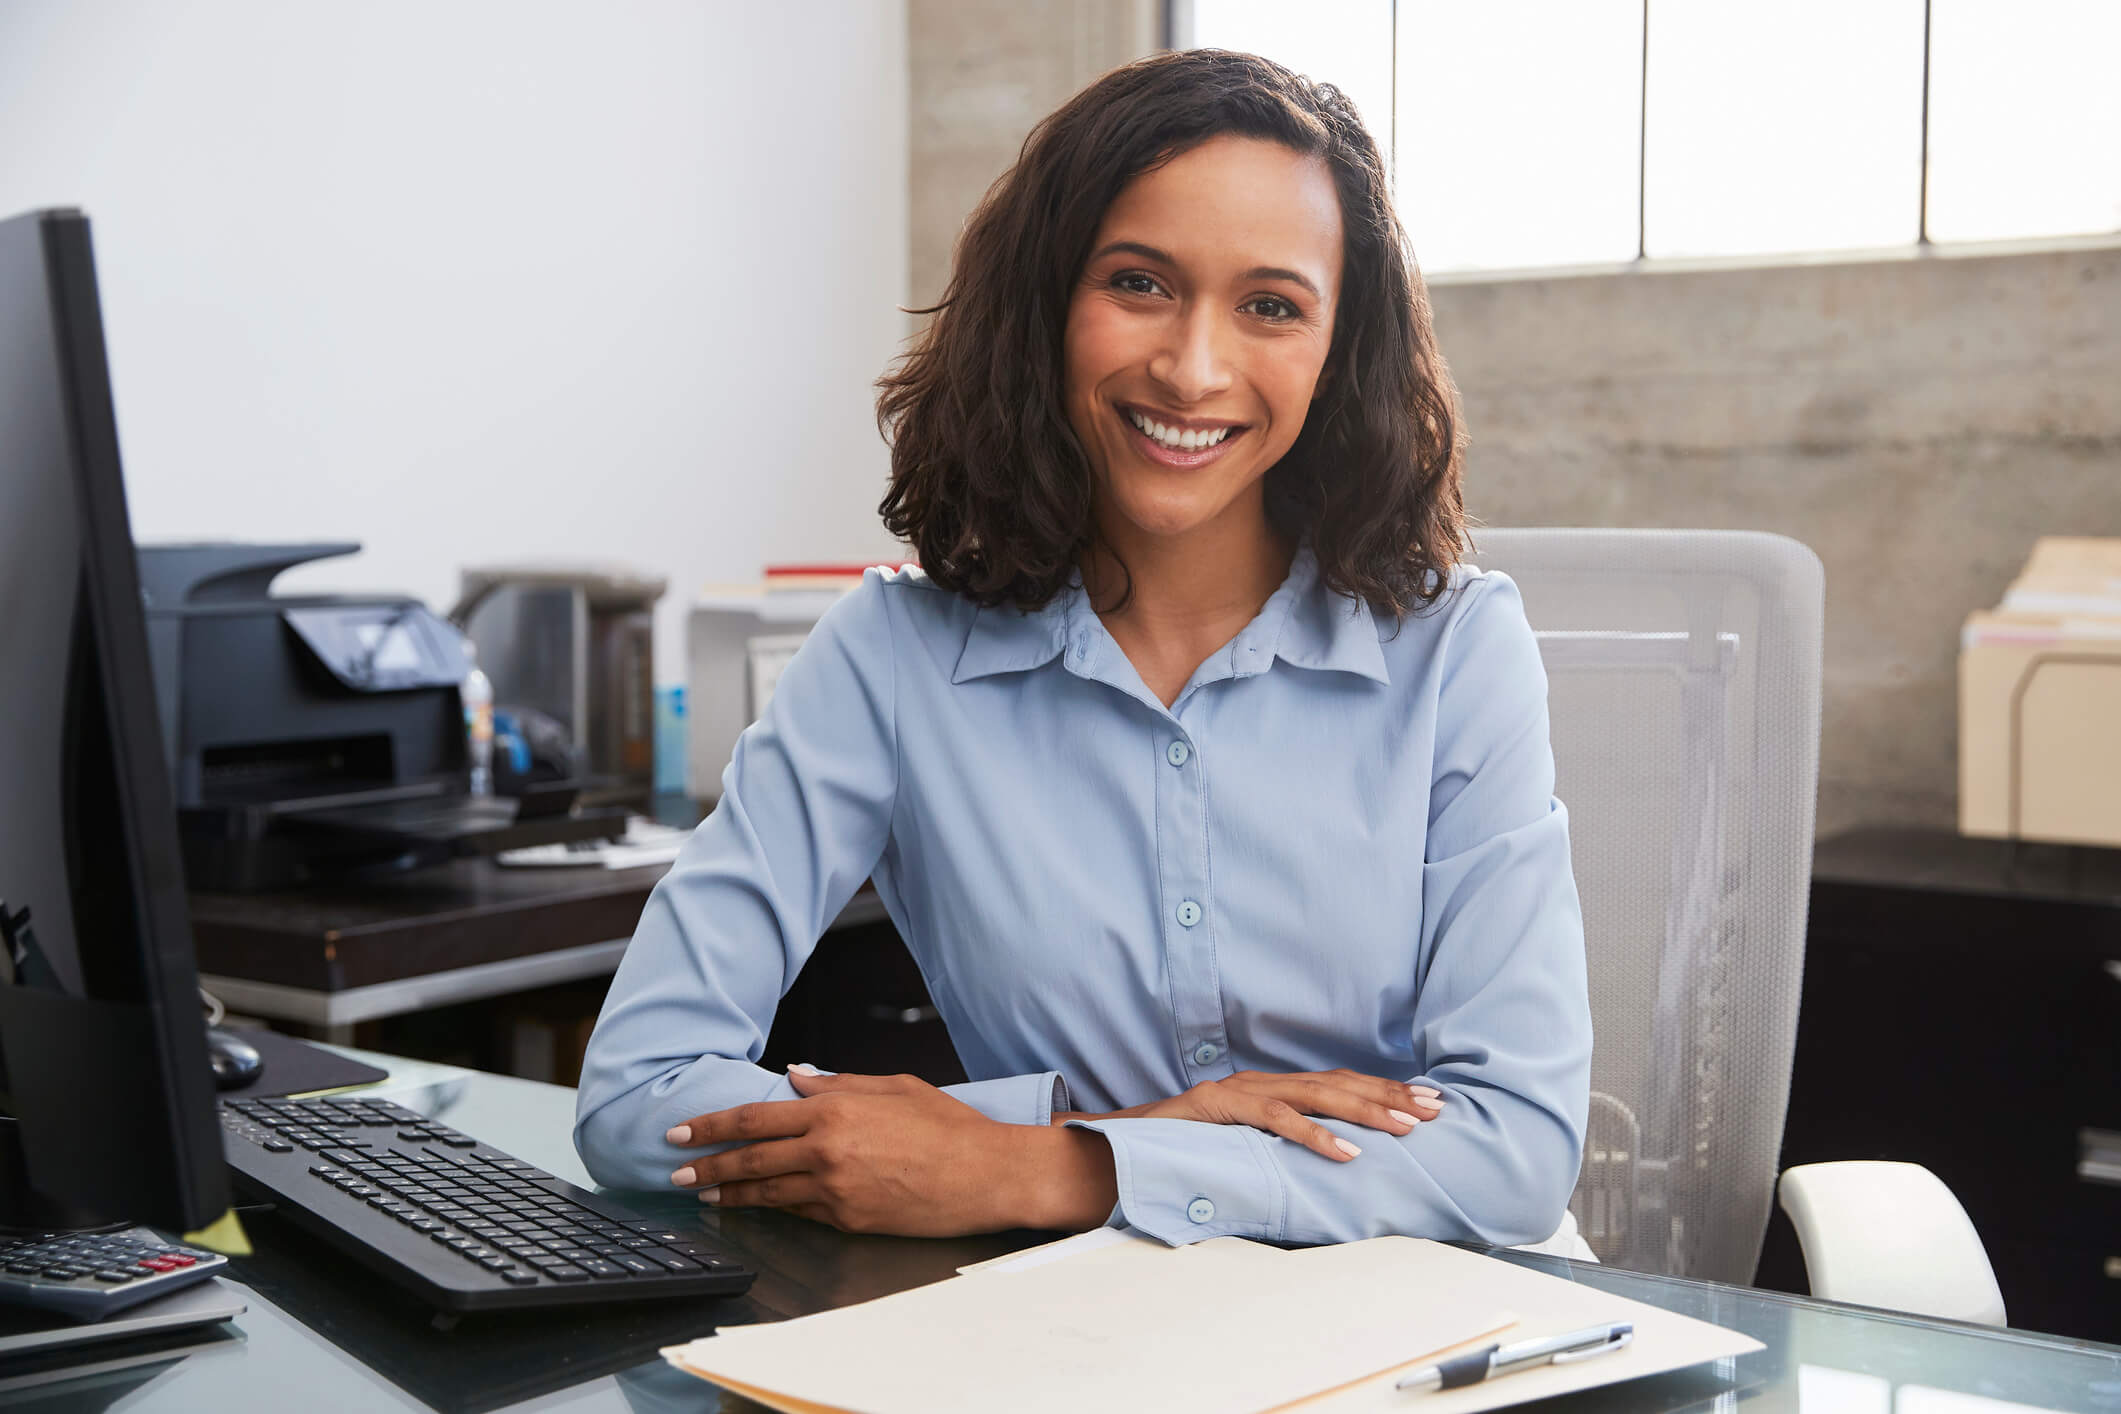 Young female professional at desk smiling to camera